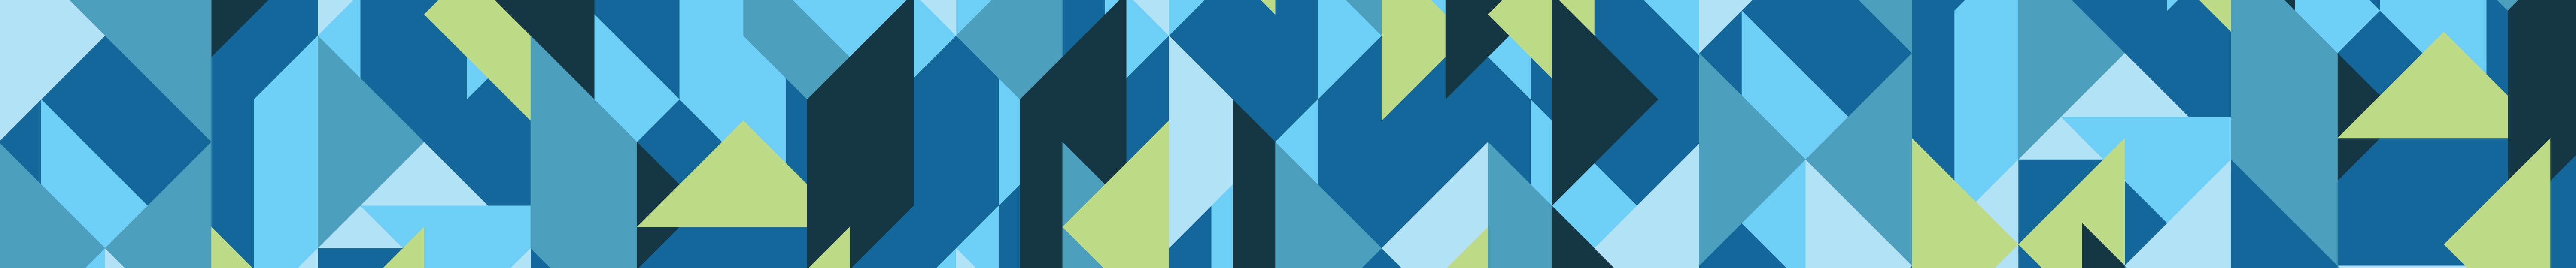 decorative pattern of green and blue geometric shapes